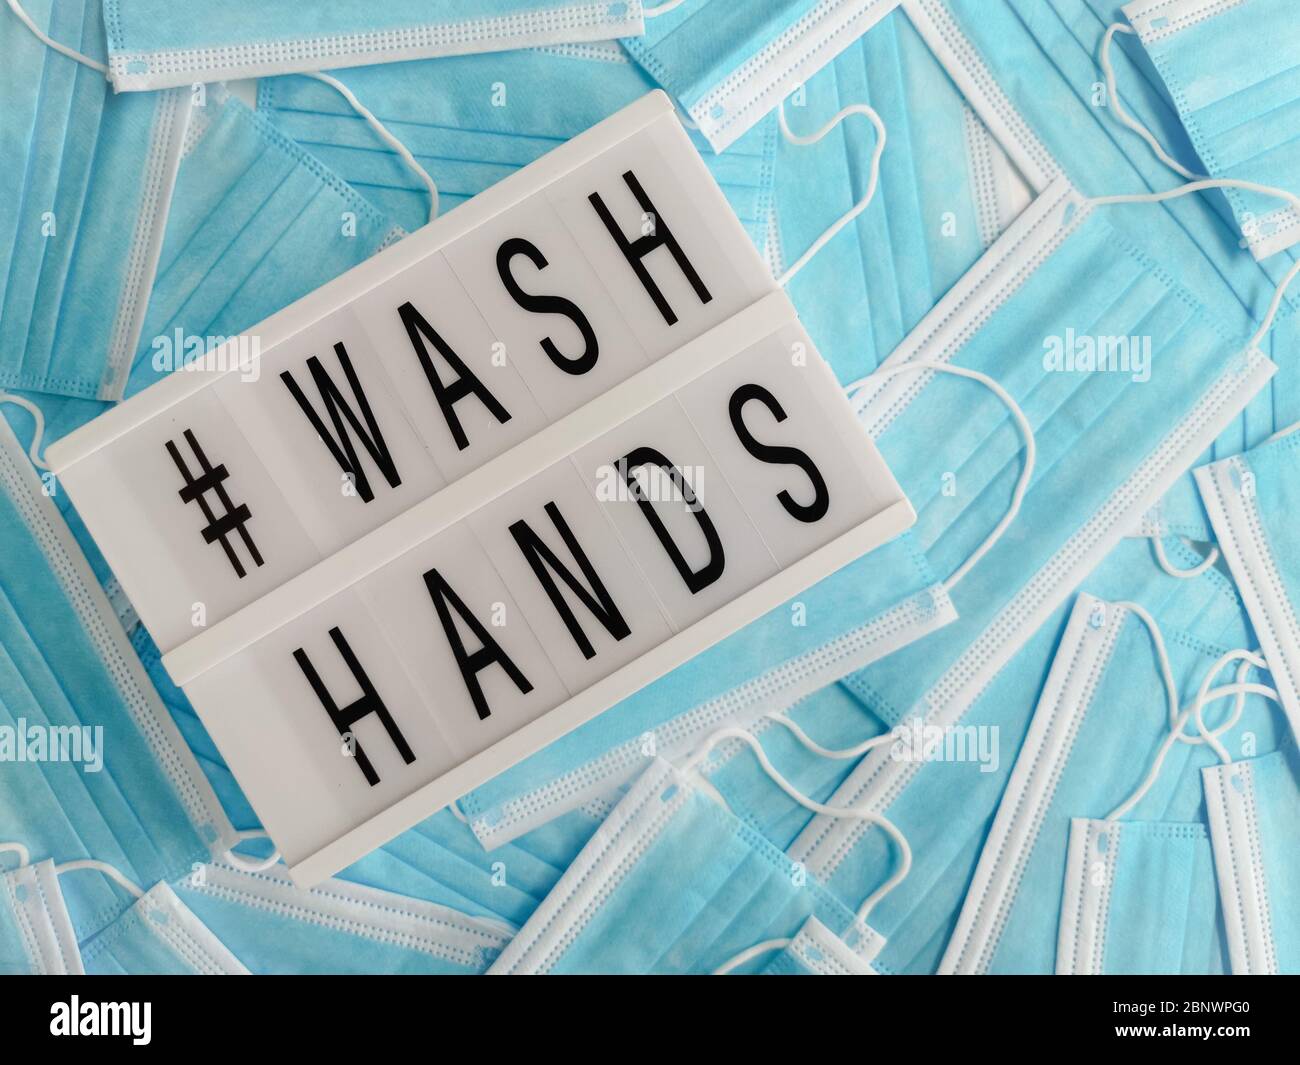 Blue surgical face masks with a white light box stating # Wash Hands Stock Photo